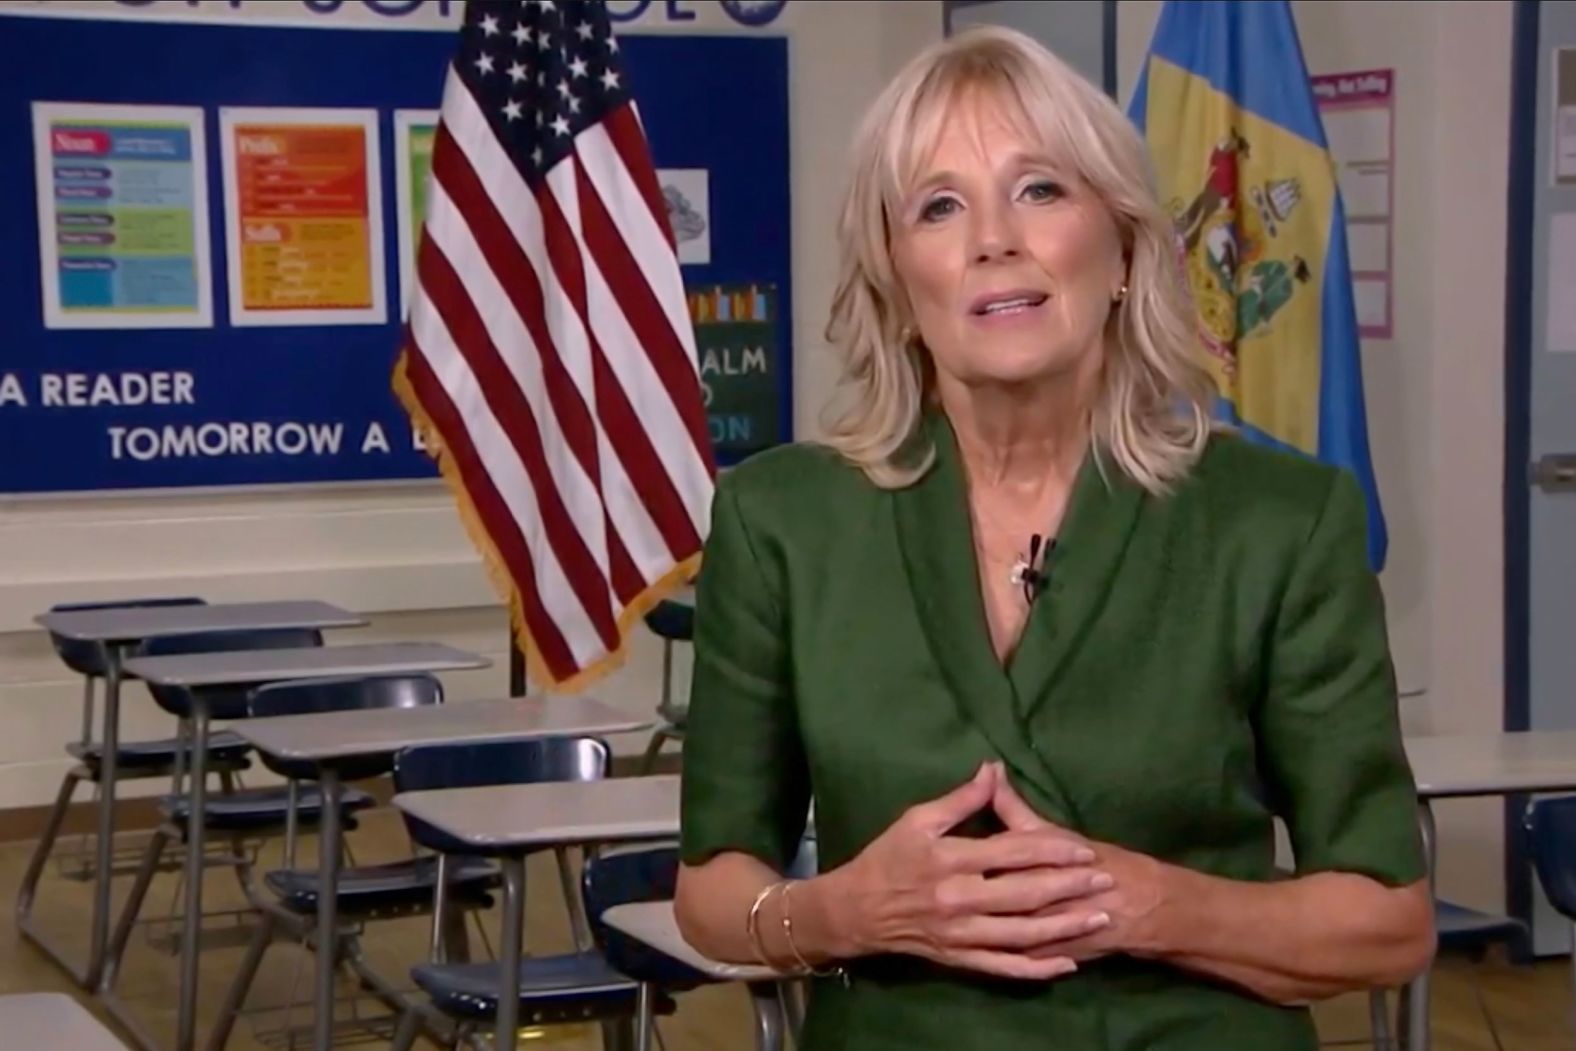 Jill Biden was the final speaker on Tuesday, <a href="index.php?page=&url=https%3A%2F%2Fwww.cnn.com%2Fpolitics%2Flive-news%2Fdnc-2020-day-2%2Fh_b8ec93b154a2816add75a73e2cd5193b" target="_blank">delivering remarks from a classroom</a> at Wilmington's Brandywine High School, where she taught English in the '90s. "The burdens we carry are heavy, and we need someone with strong shoulders," she said. "I know that if we entrust this nation to Joe, he will do for your family what he did for ours — bring us together and make us whole." Her speech also addressed how the pandemic has shuttered many schools. "These classrooms will ring out with laughter and possibility once again," she said.